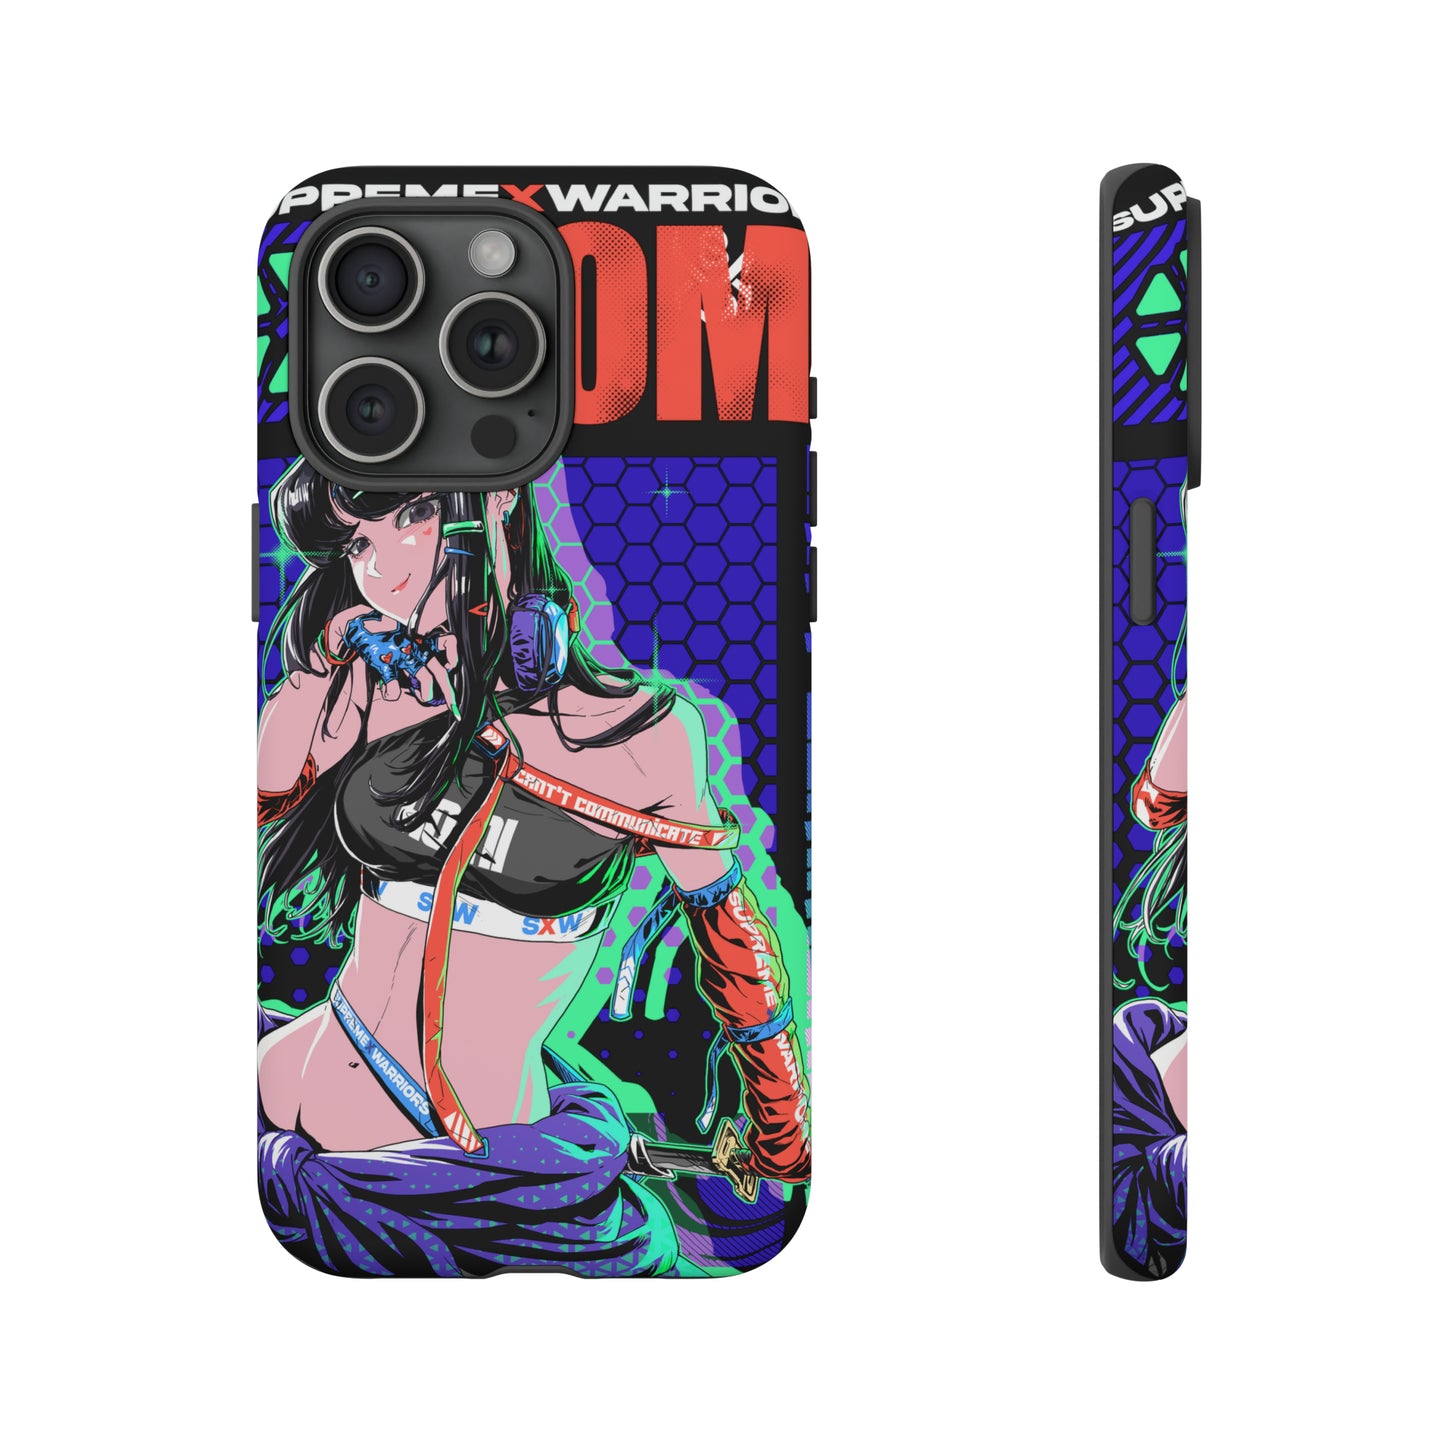 Komi / iPhone Cases - LIMITED